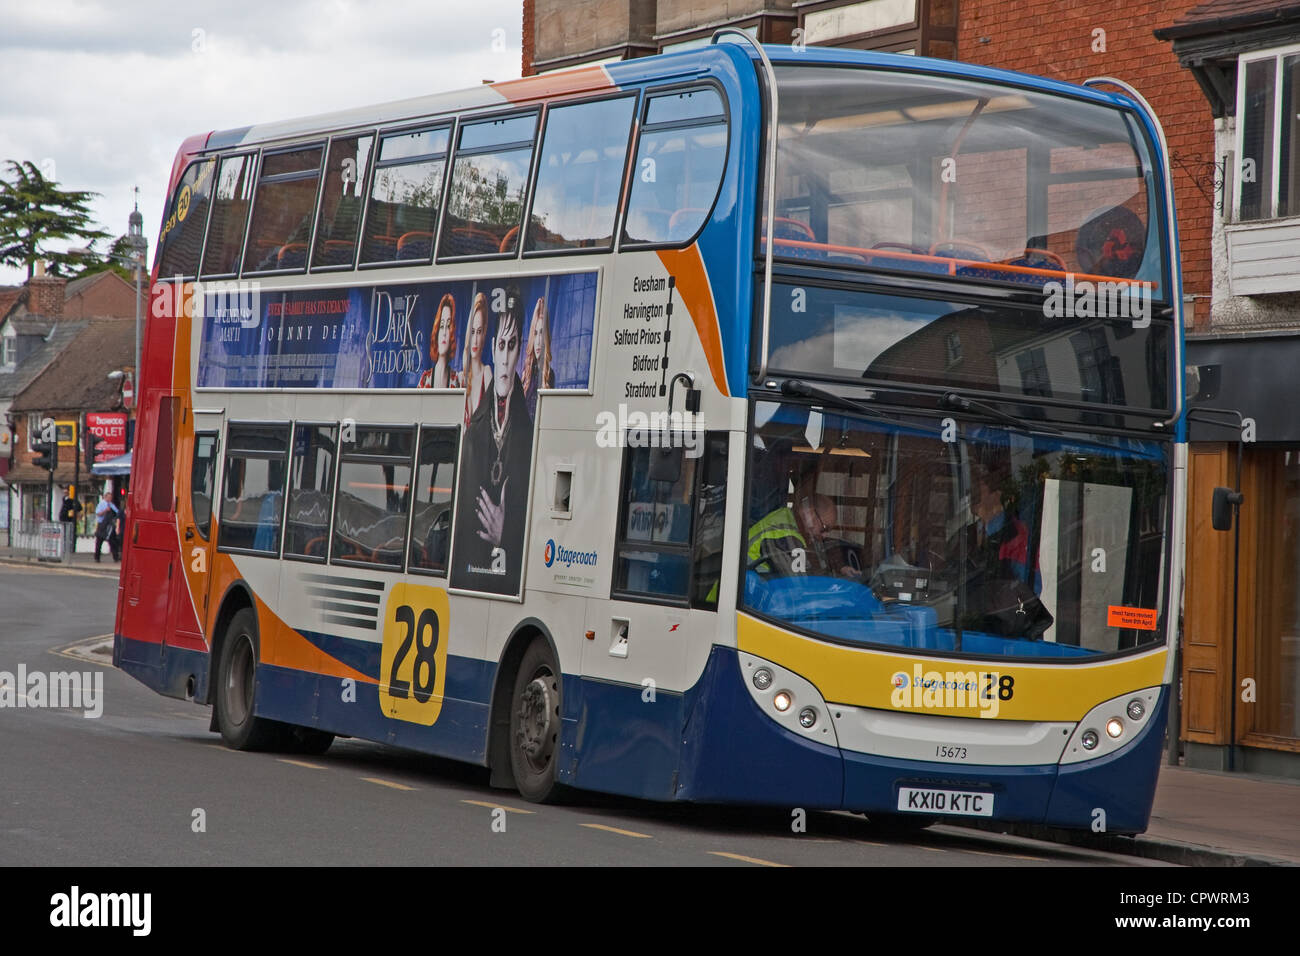 Stagecoach double deck bus Stock Photo